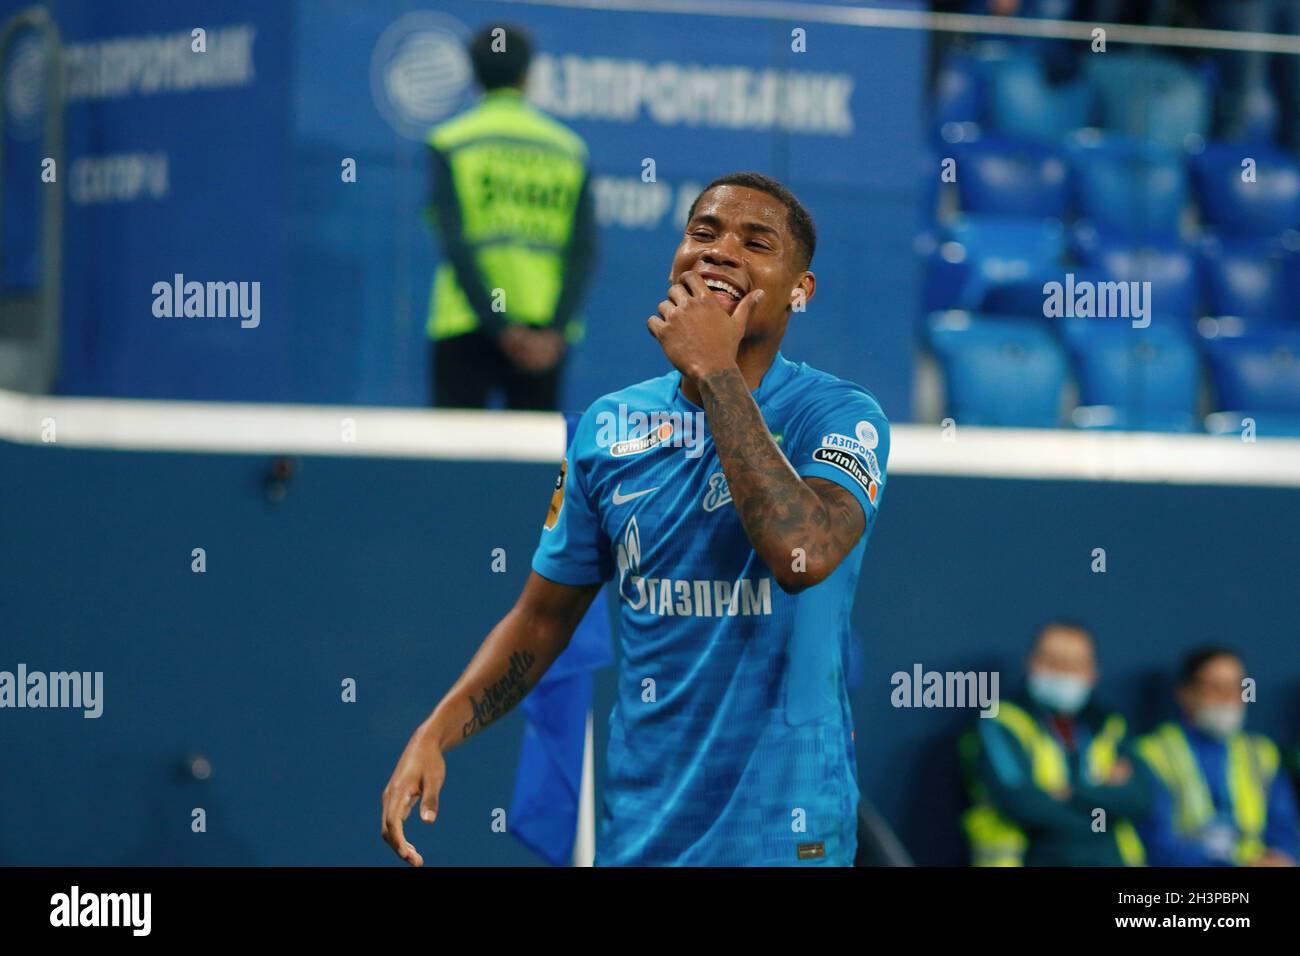 Saint Petersburg, Russia. 29th Oct, 2021. Wilmar Henrique Barrios Teran, commonly known as Wilmar Barrios (No.5) of Zenit seen during the Russian Premier League football match between Zenit Saint Petersburg and Dynamo Moscow at Gazprom Arena.Final score; Zenit 4:1 Dynamo. Credit: SOPA Images Limited/Alamy Live News Stock Photo